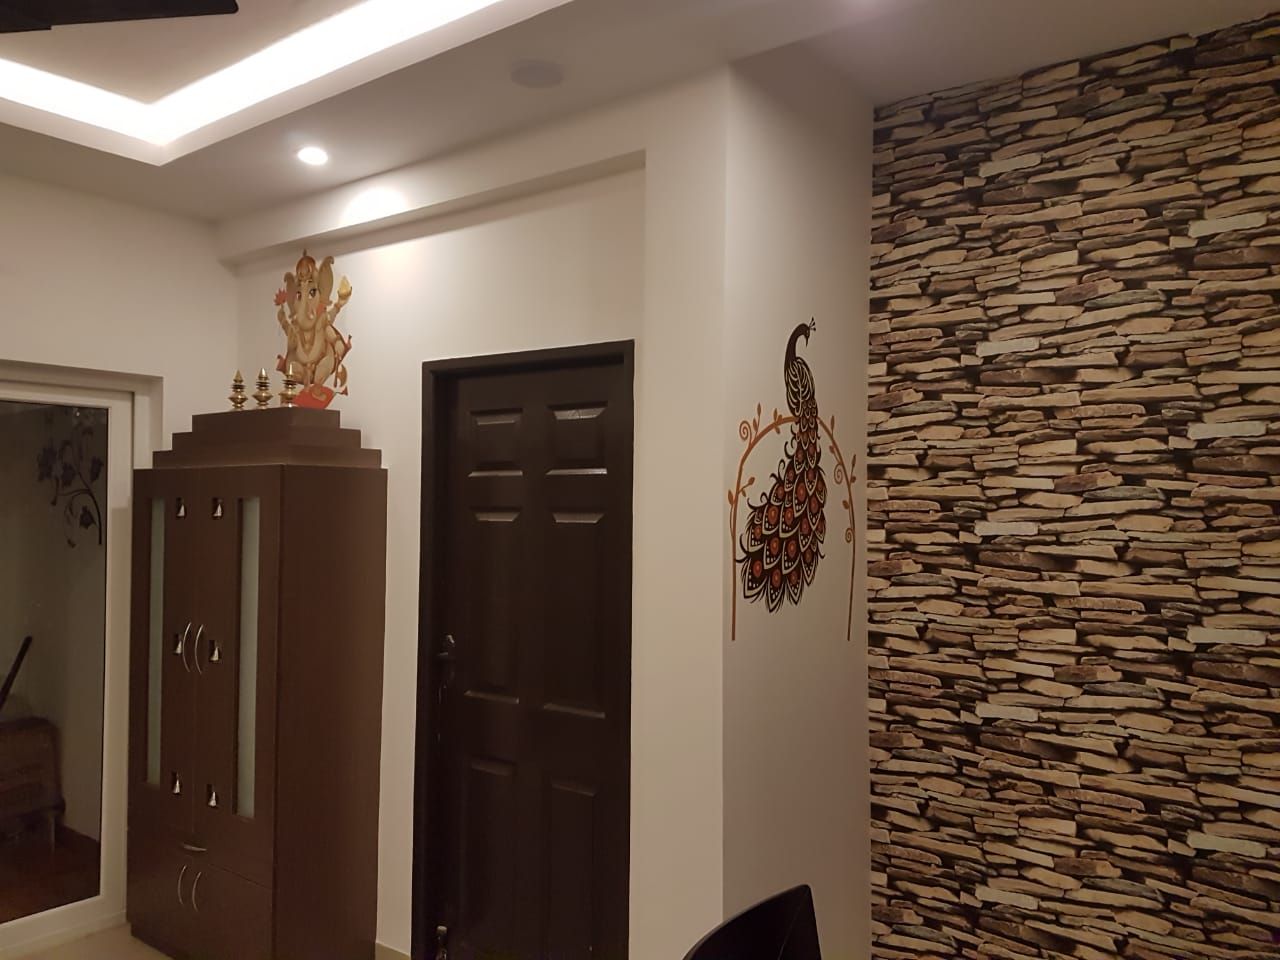 2BHK Residential Interiors at VGN Hazel, Interios by MK Design Interios by MK Design